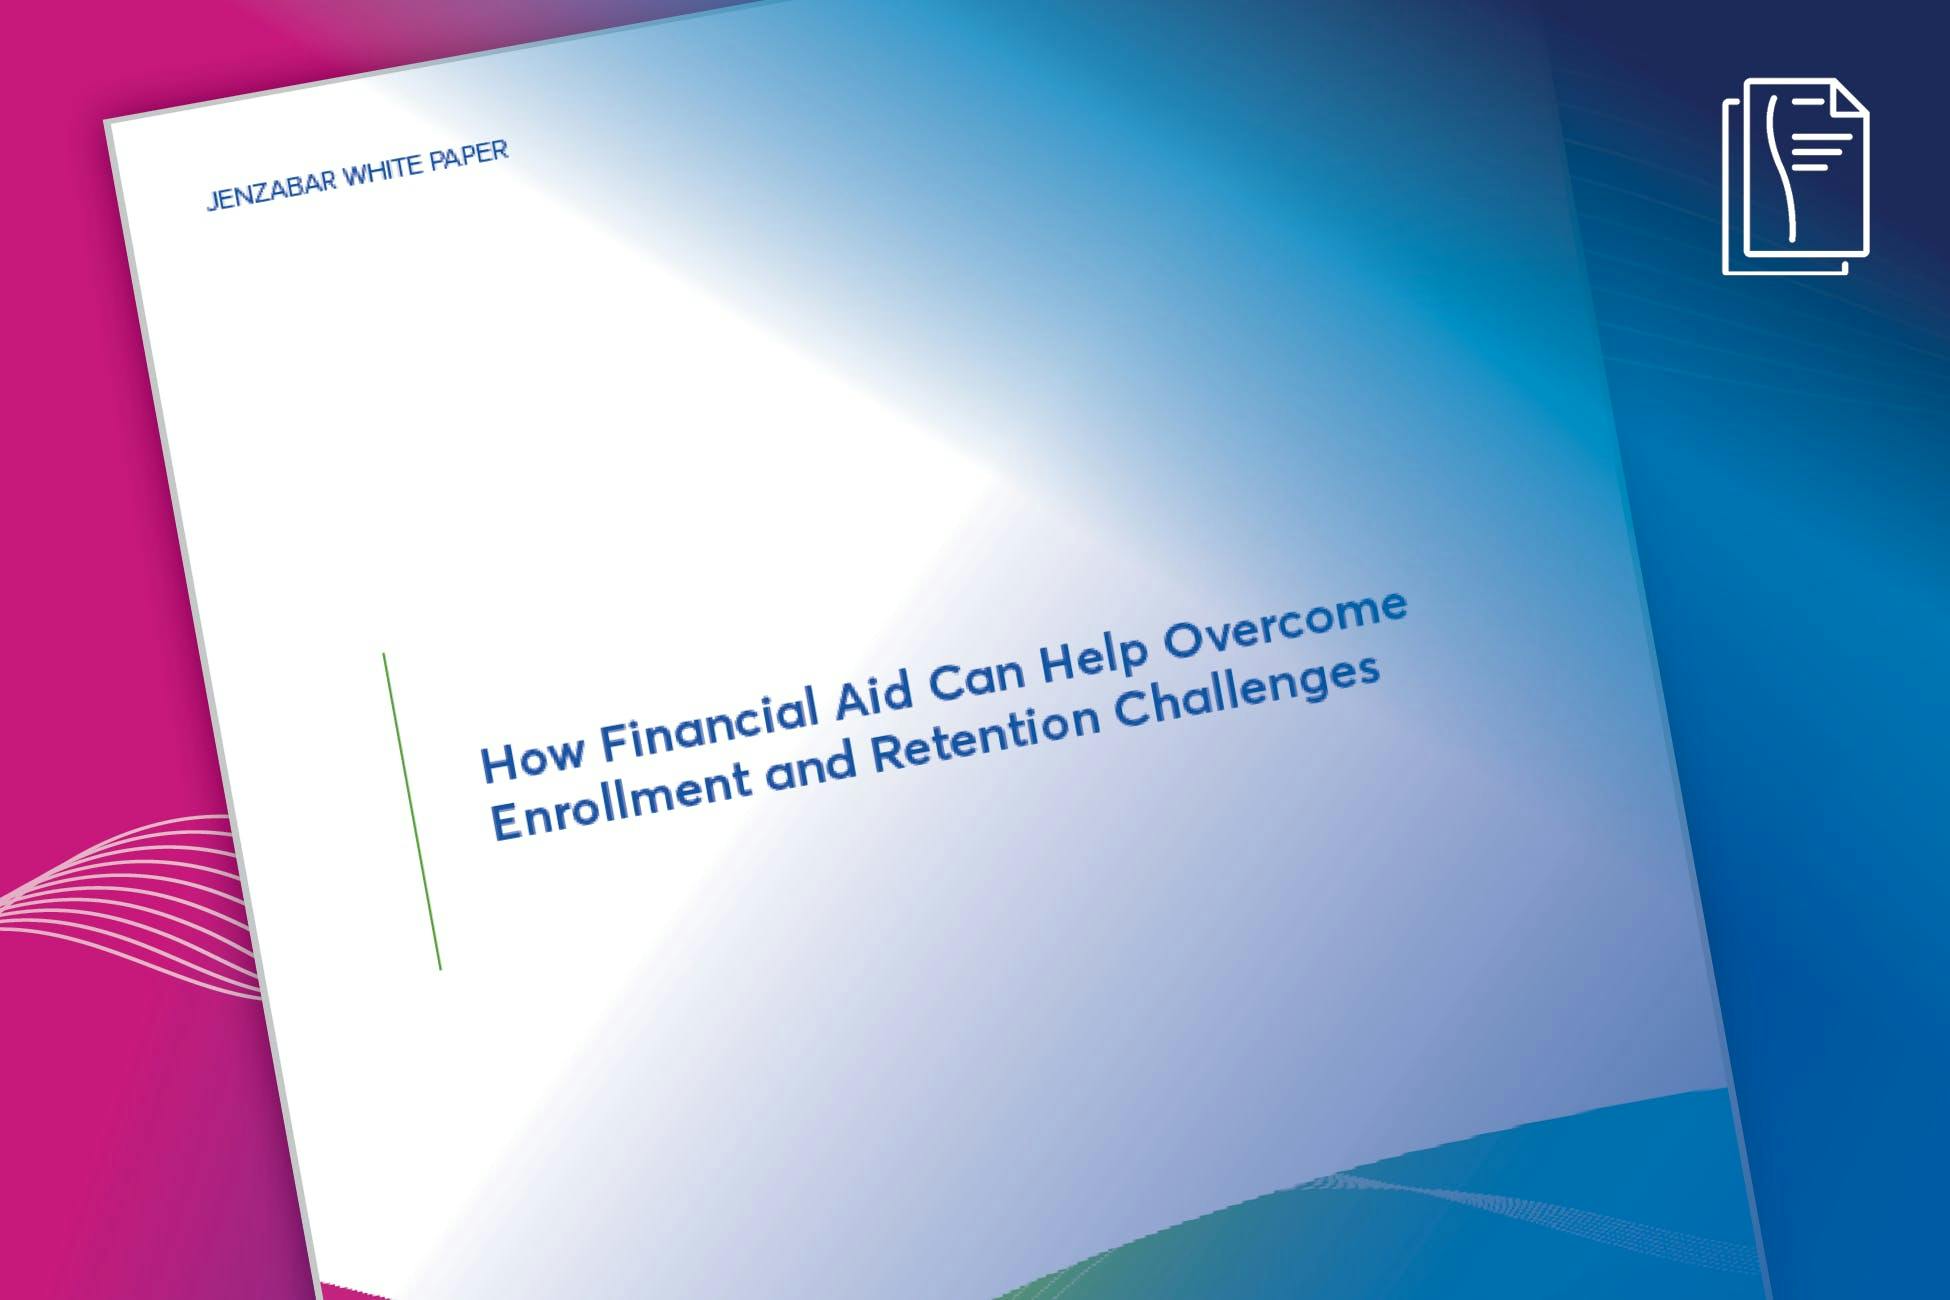 White Paper: How Financial Aid Can Help Overcome Enrollment and Retention Challenges